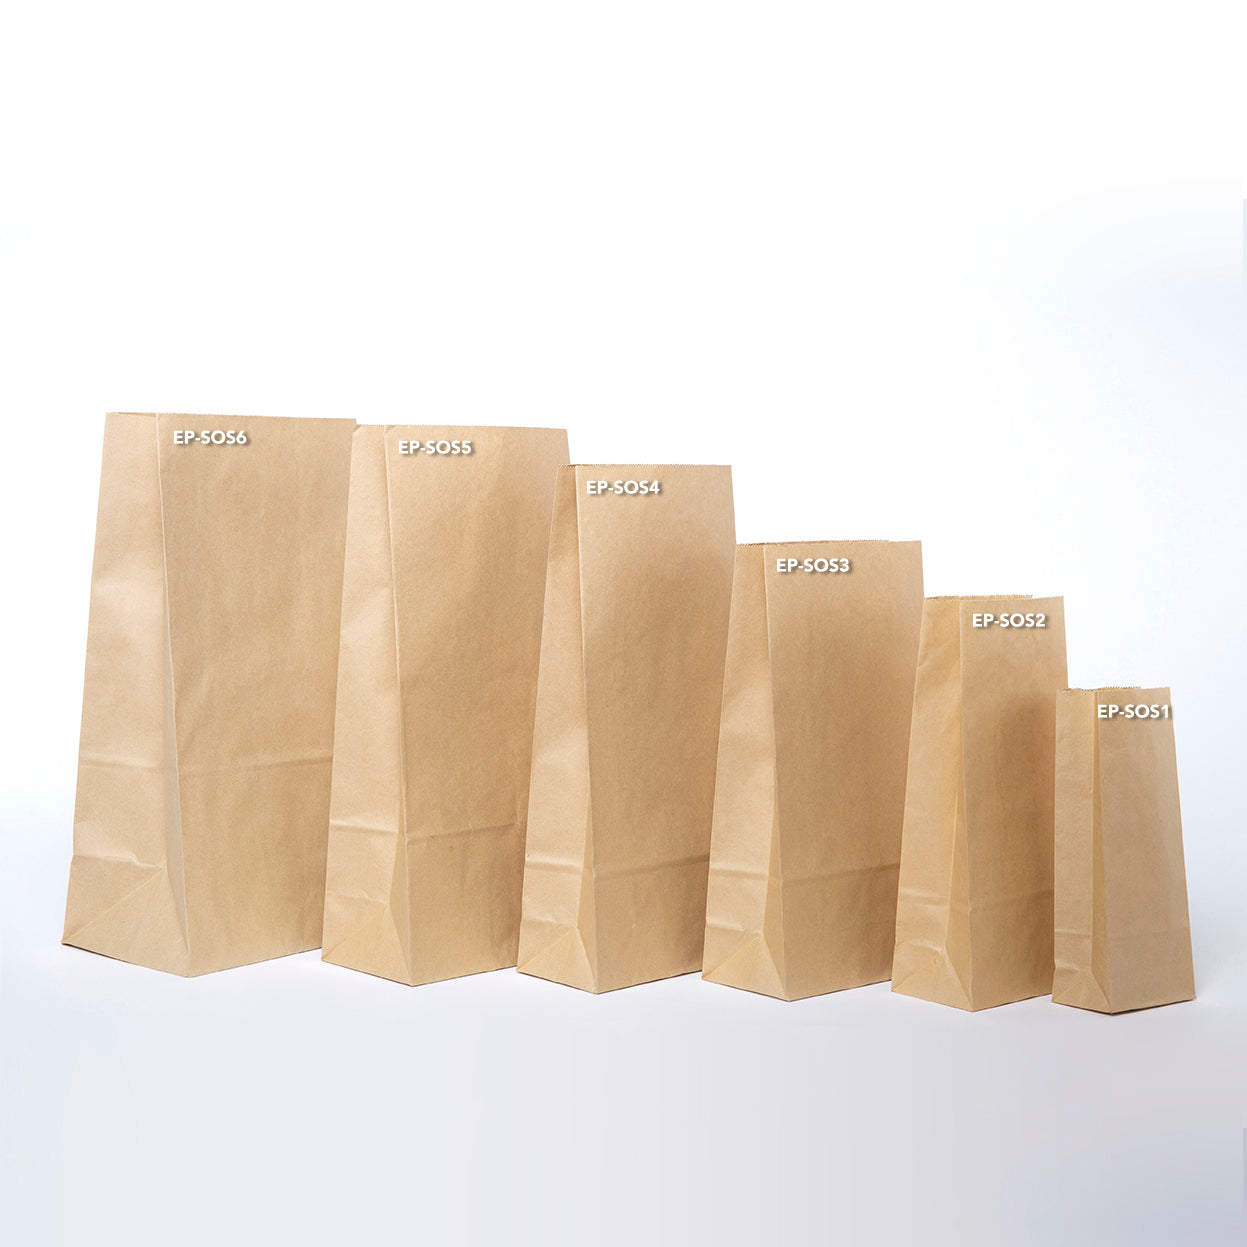 EP-SOS3 Small Lightweight Paper Bags - Set of 50